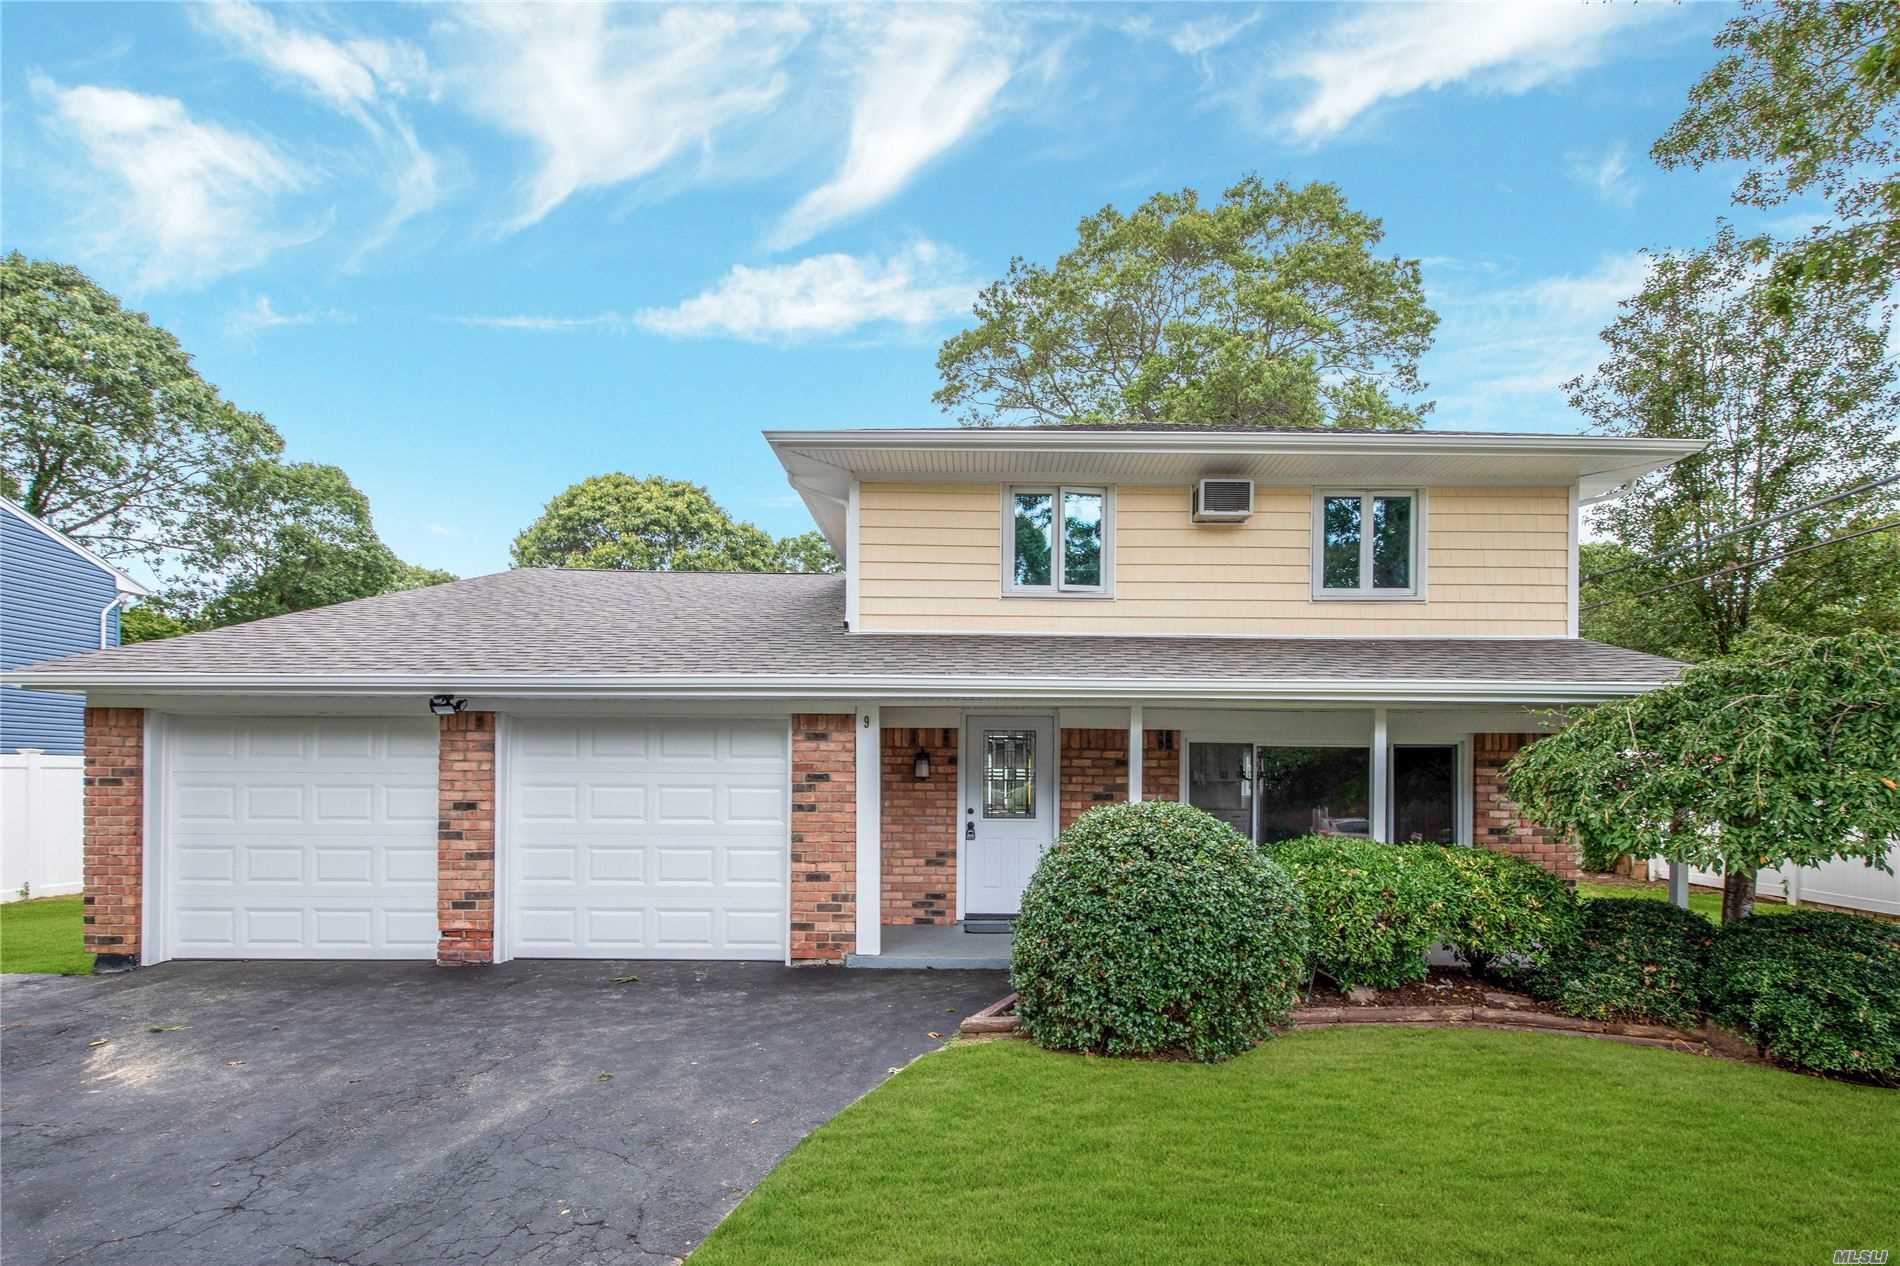 Lovely, spacious Split Colonial that affords choices in floor plan use. Has been renovated to include new roof, siding, Kitchen, Baths, Floors, Carpet, Garage Doors, Pool Liner, Pump & Filter. Just unpack! Literally around corner from Elementary School & 2mins. from Smith Haven Mall.